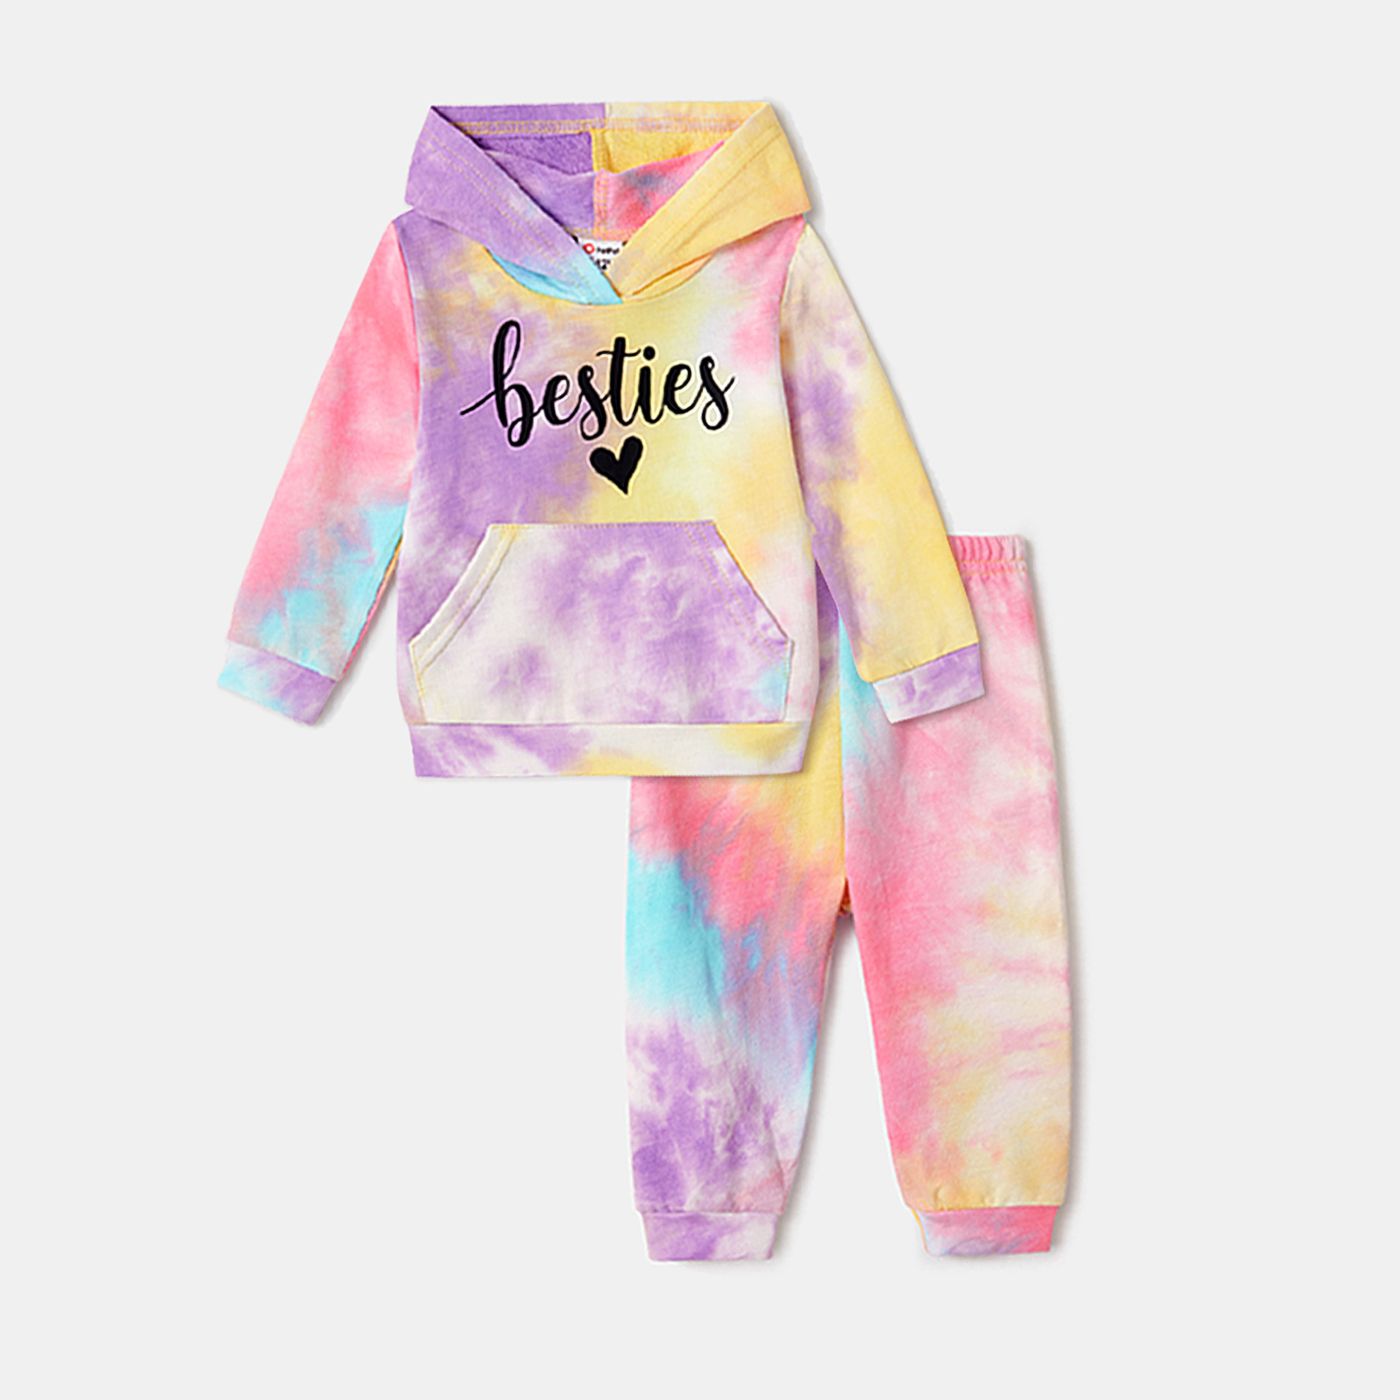 100% Cotton Letter Print Colorful Tie Dye Long-sleeve Hoodies For Mom And Me